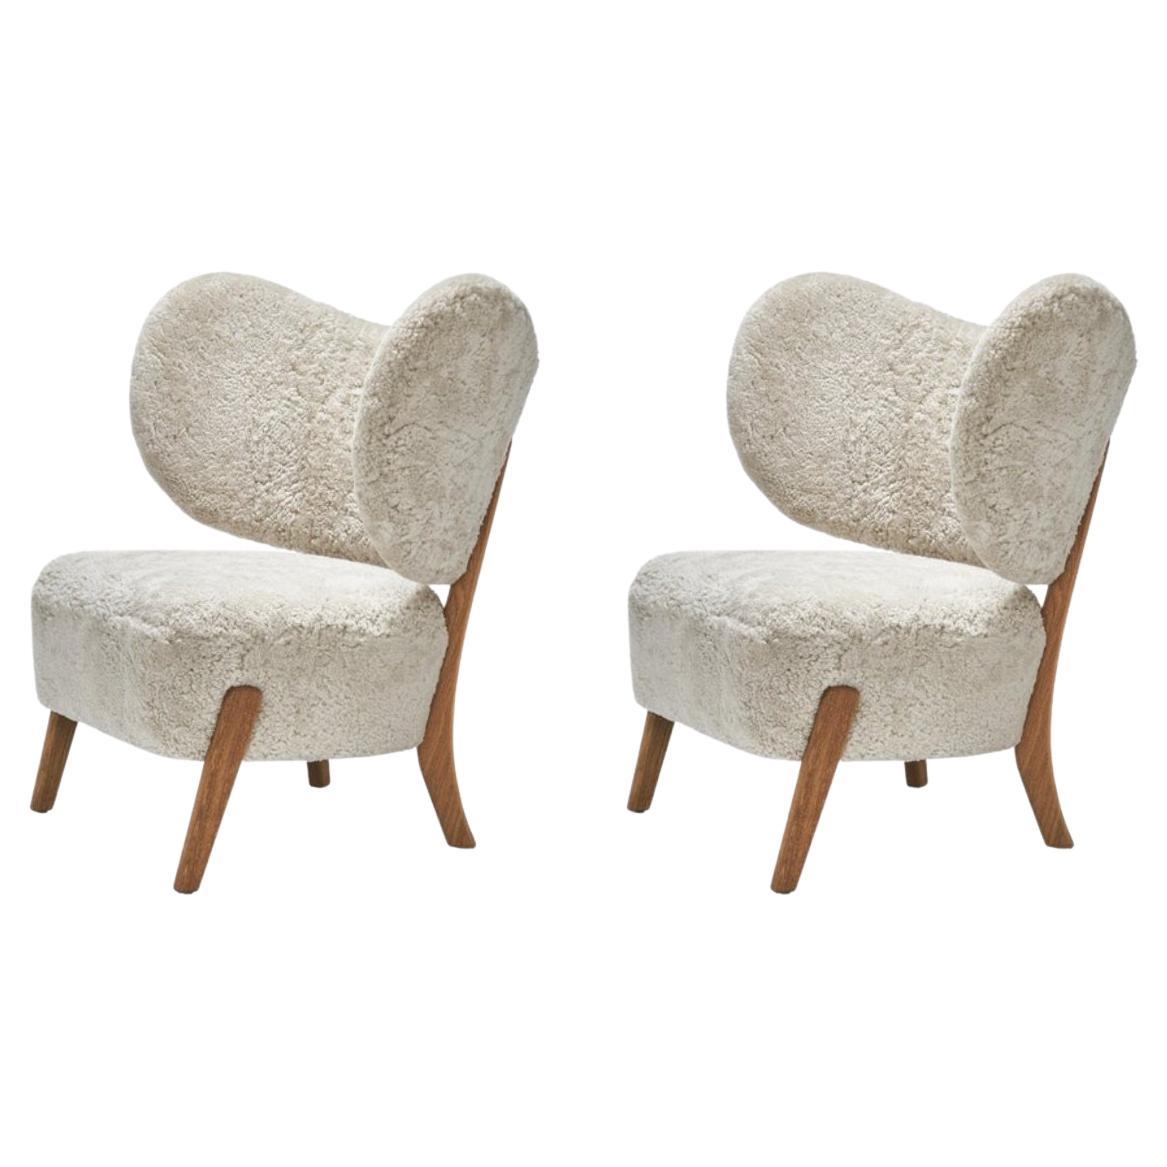 Set of 2 Moonlight Sheepskin TMBO Lounge Chairs by Mazo Design For Sale